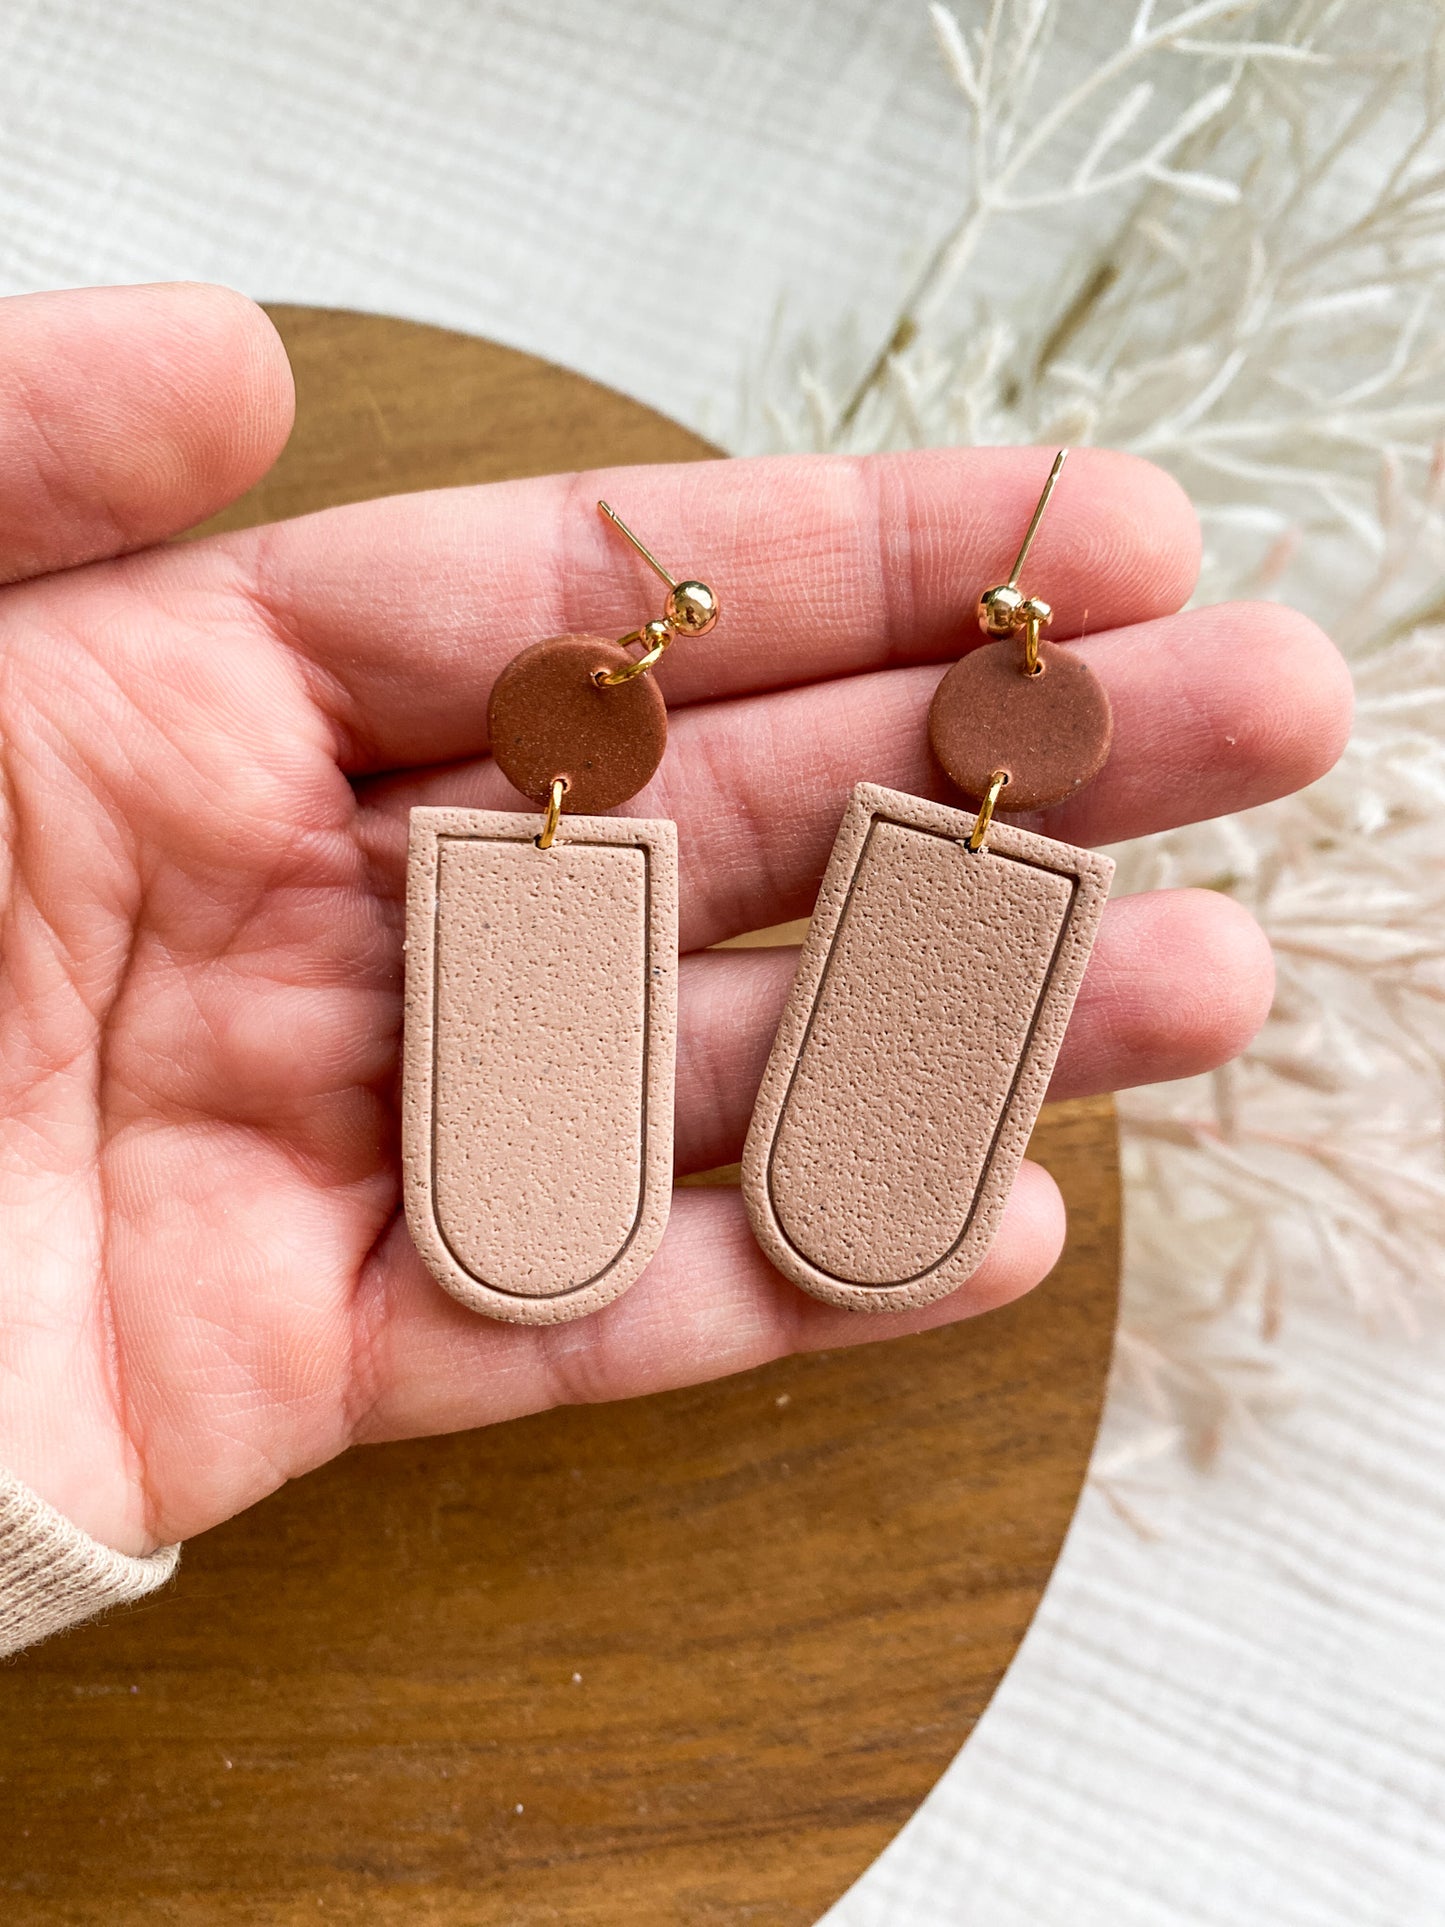 Everyday Wear Textured Clay Earrings | Neutral Style Earrings | Polymer Clay and Metal Accent | Lightweight Earrings